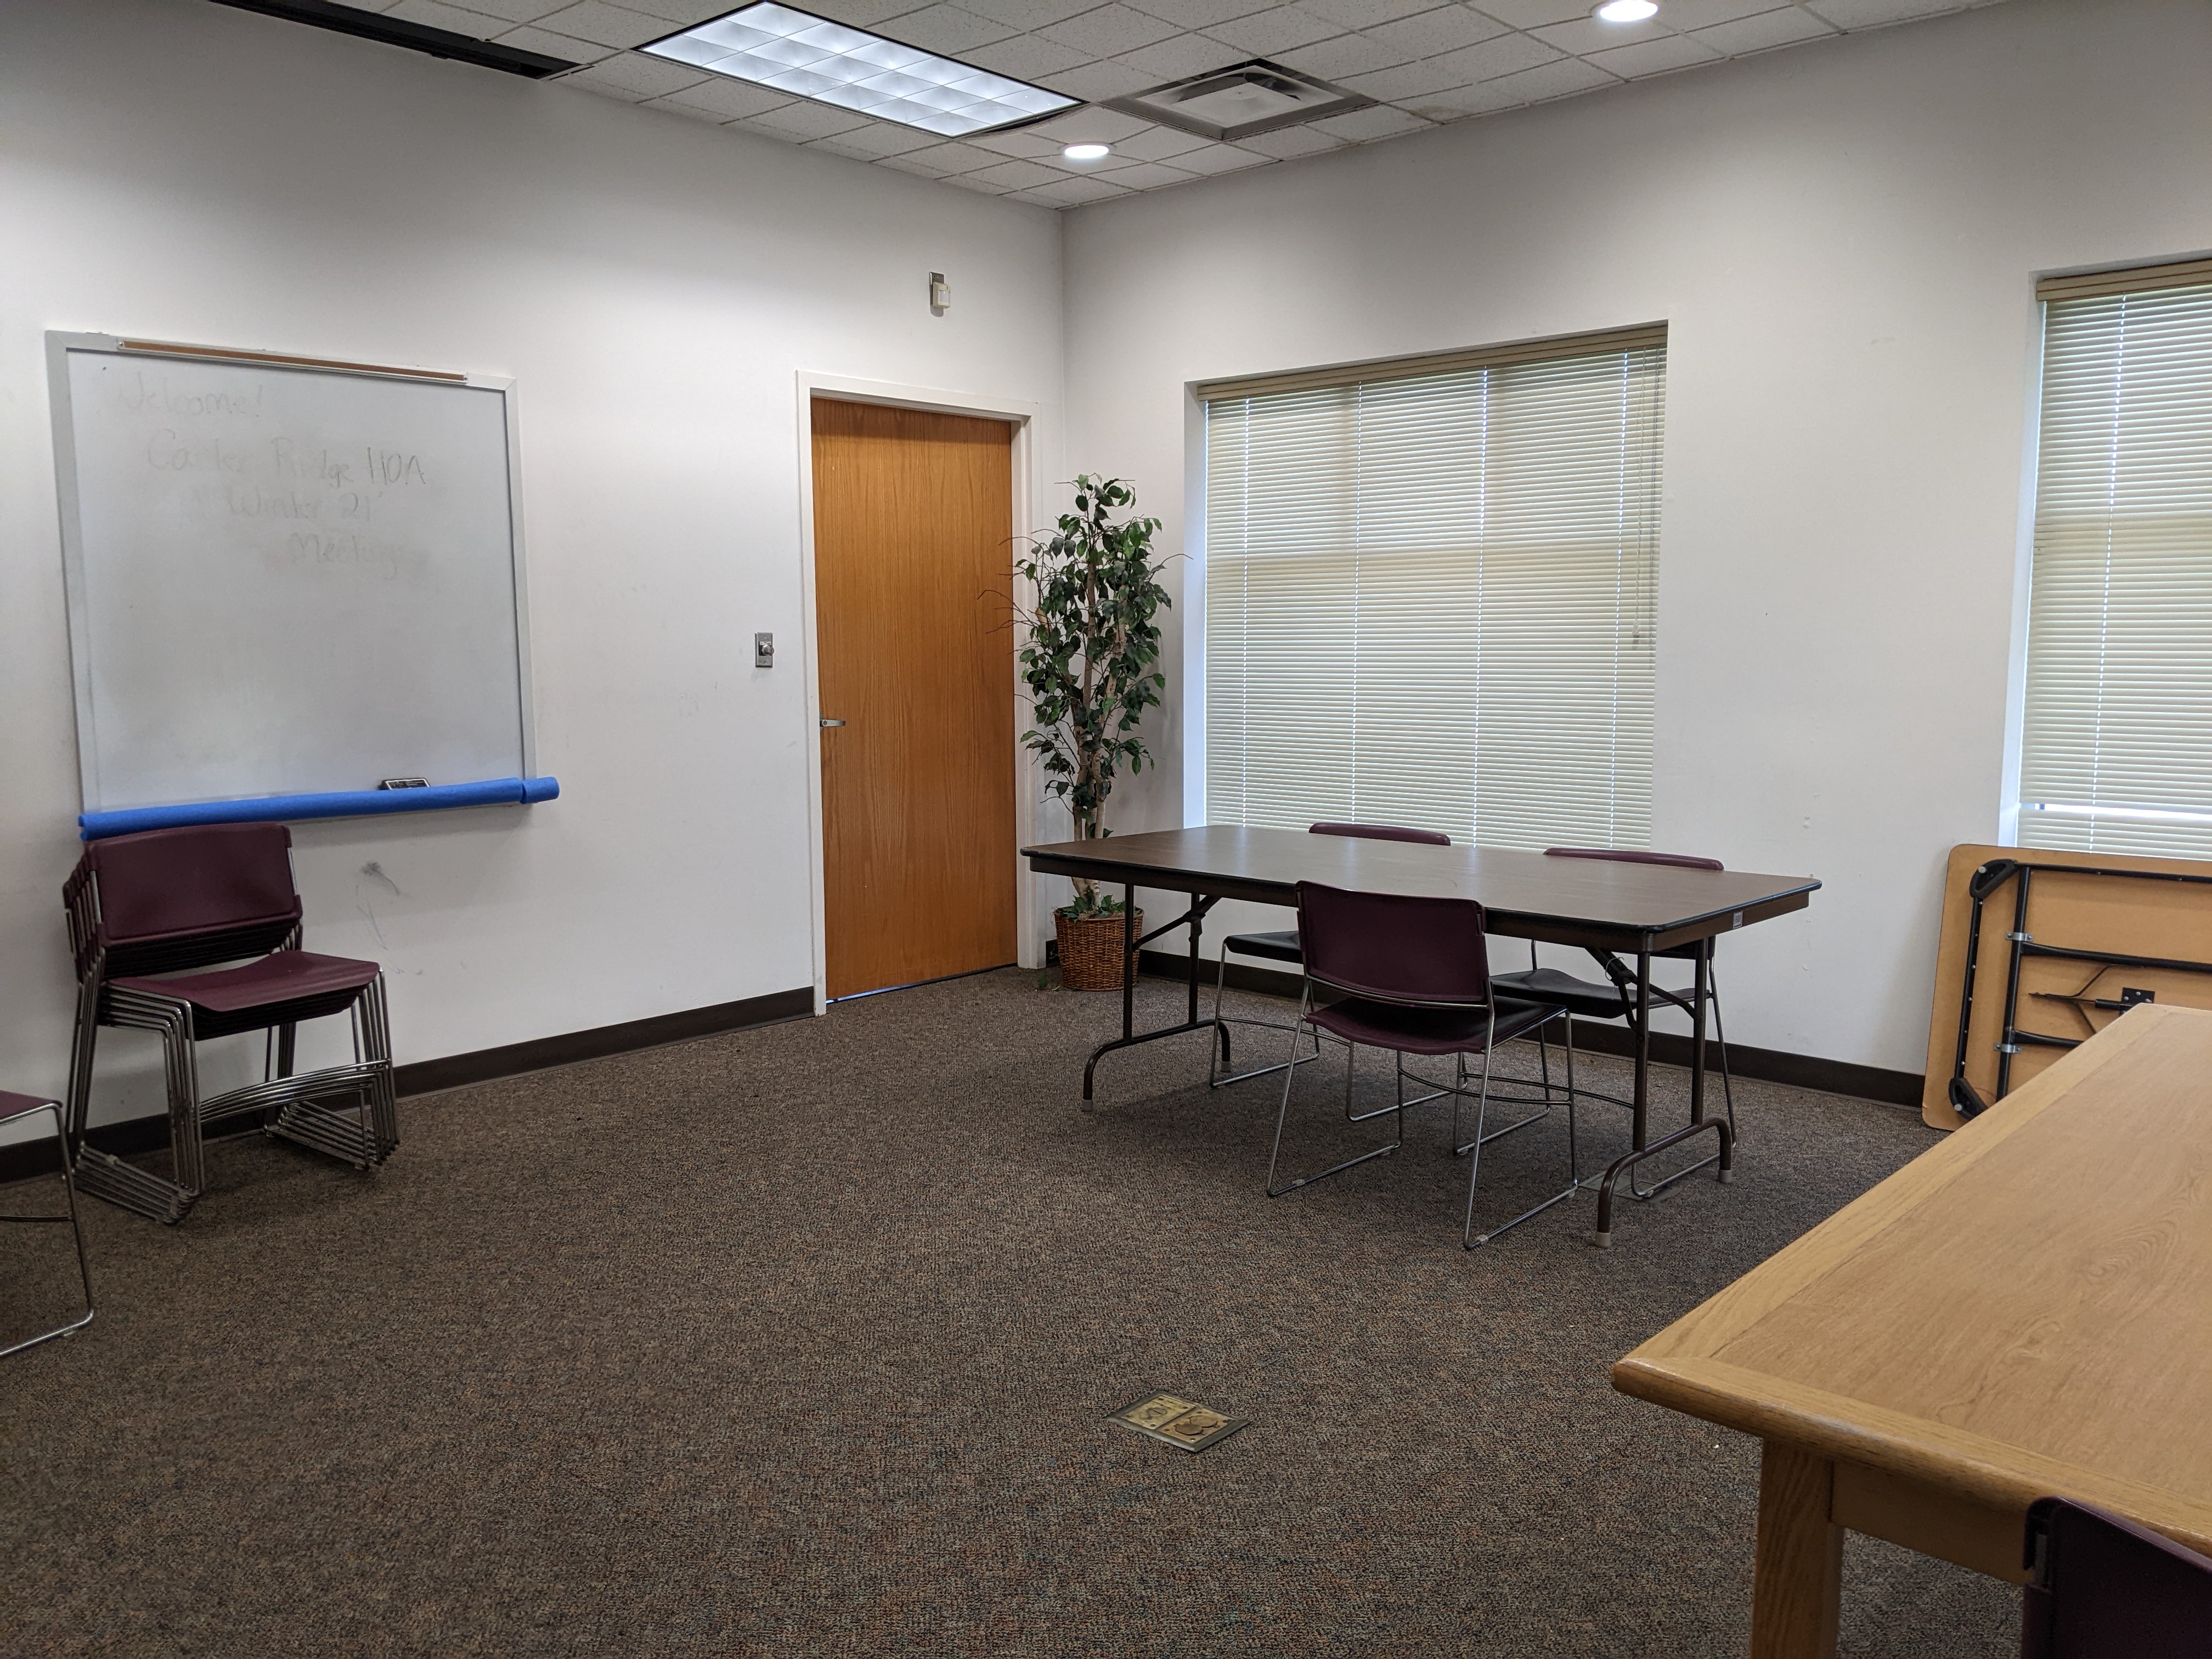 Photo shows a carpeted room, windows with blinds, folding tables and stackable chairs. A dry-erase board is on one wall.